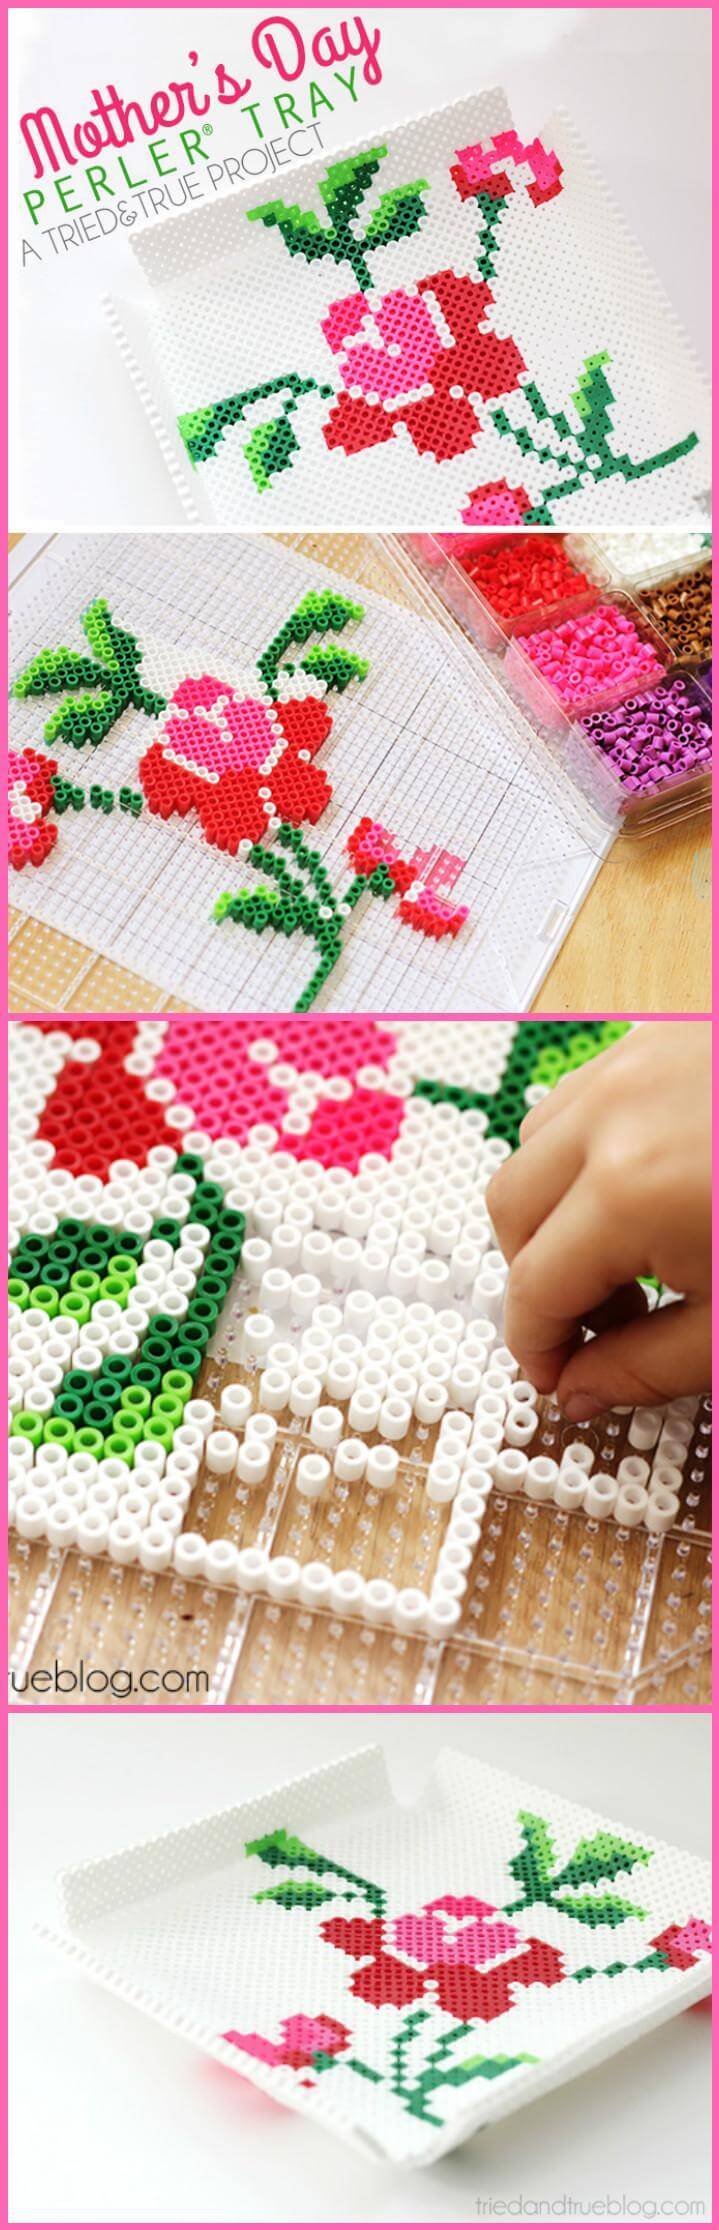 easy Mother's Day perfer bead tray